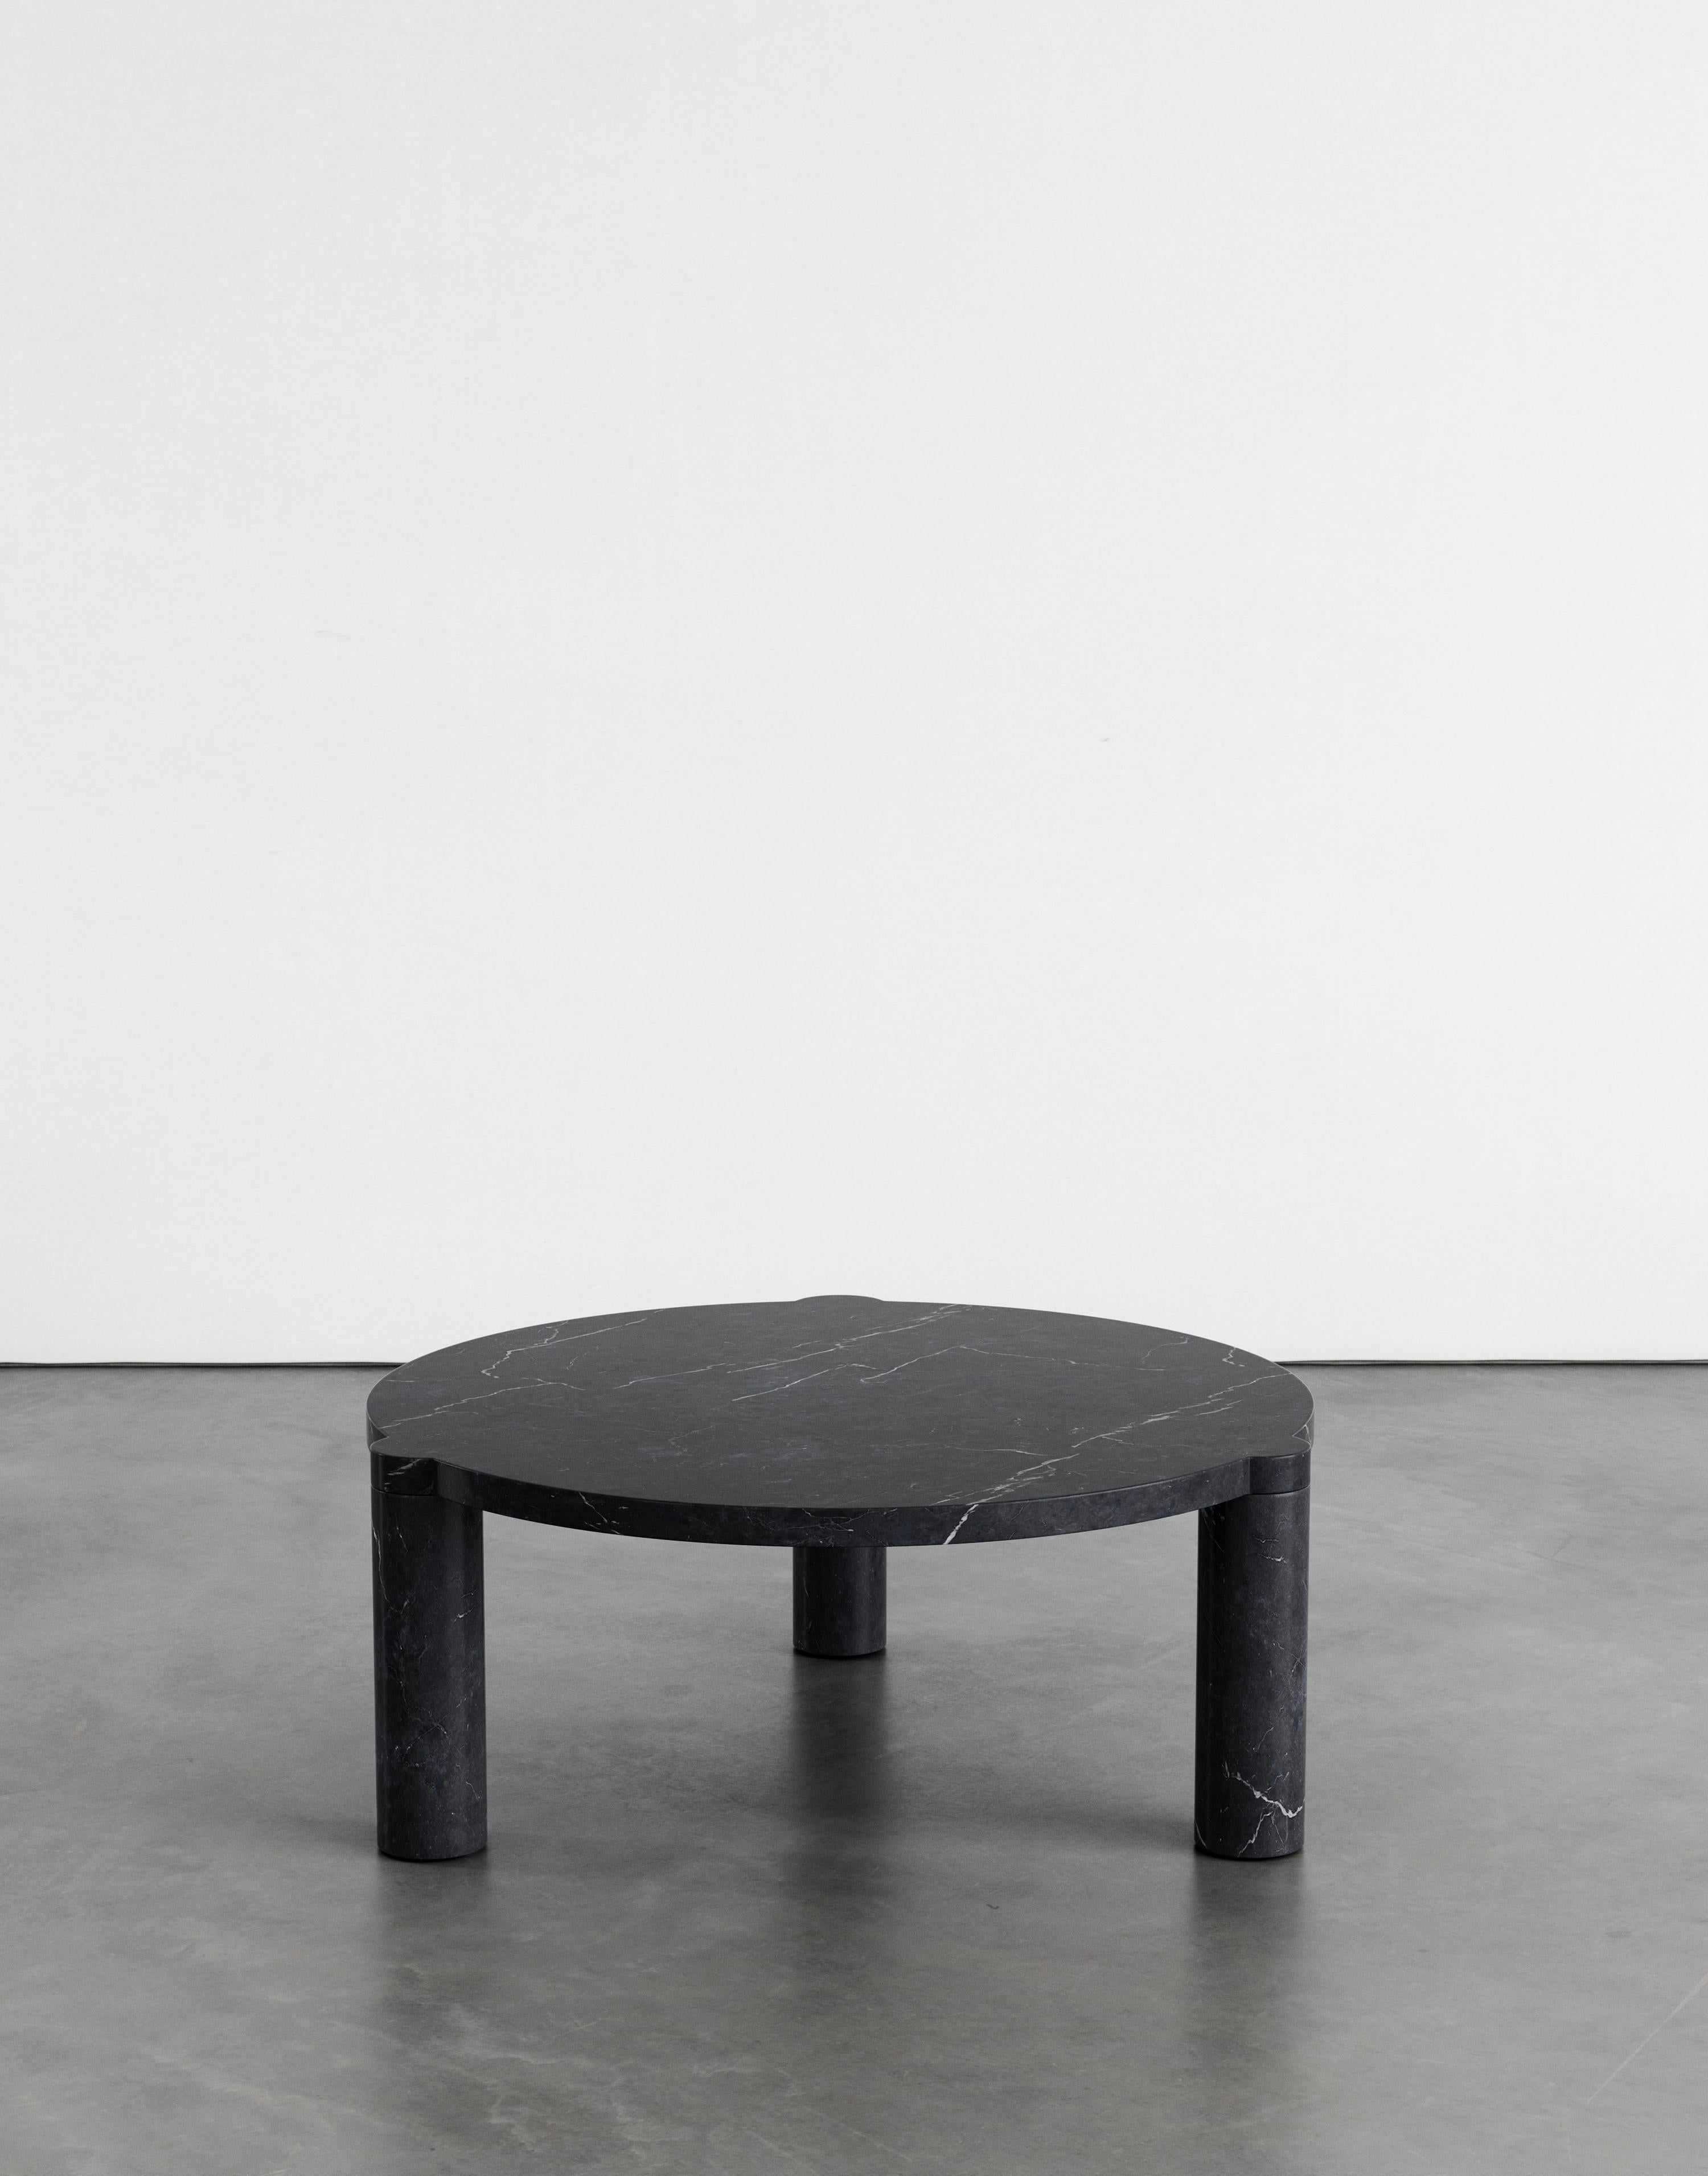 Alexis 80 coffee table by Agglomerati.
Dimensions: W 80 x H 33 cm. 
Materials: Black Marquina. Available in other stones. 

Agglomerati is a London-based studio creating distinctive stone furniture. Established in 2019 by Australian designer Sam